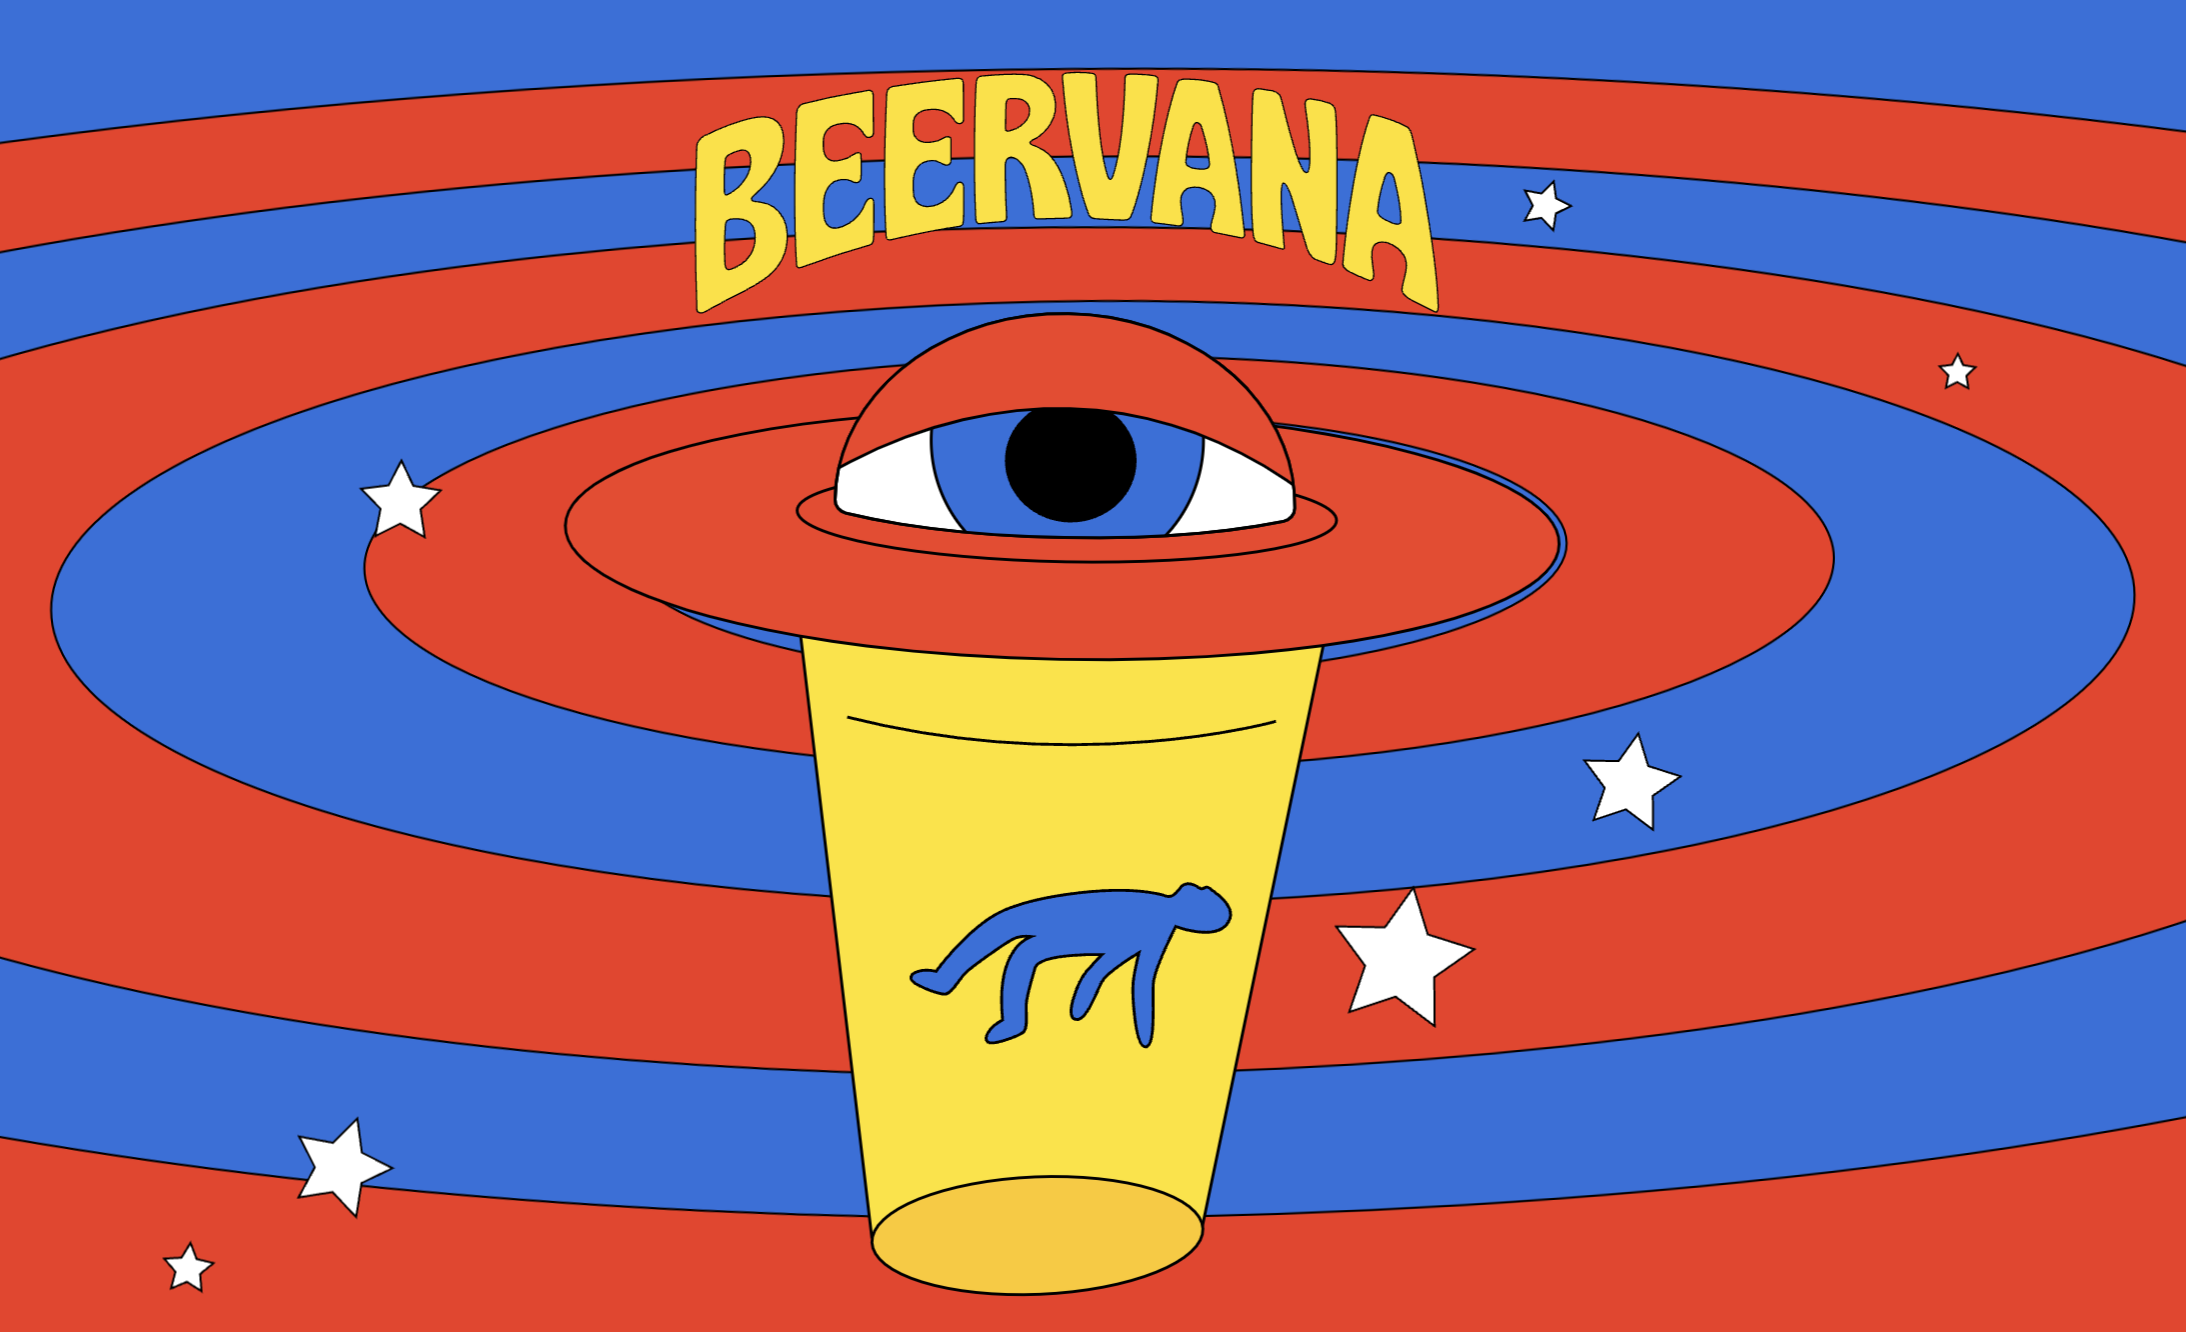 Trippy Beervana branding with an eye alien abducting a person 